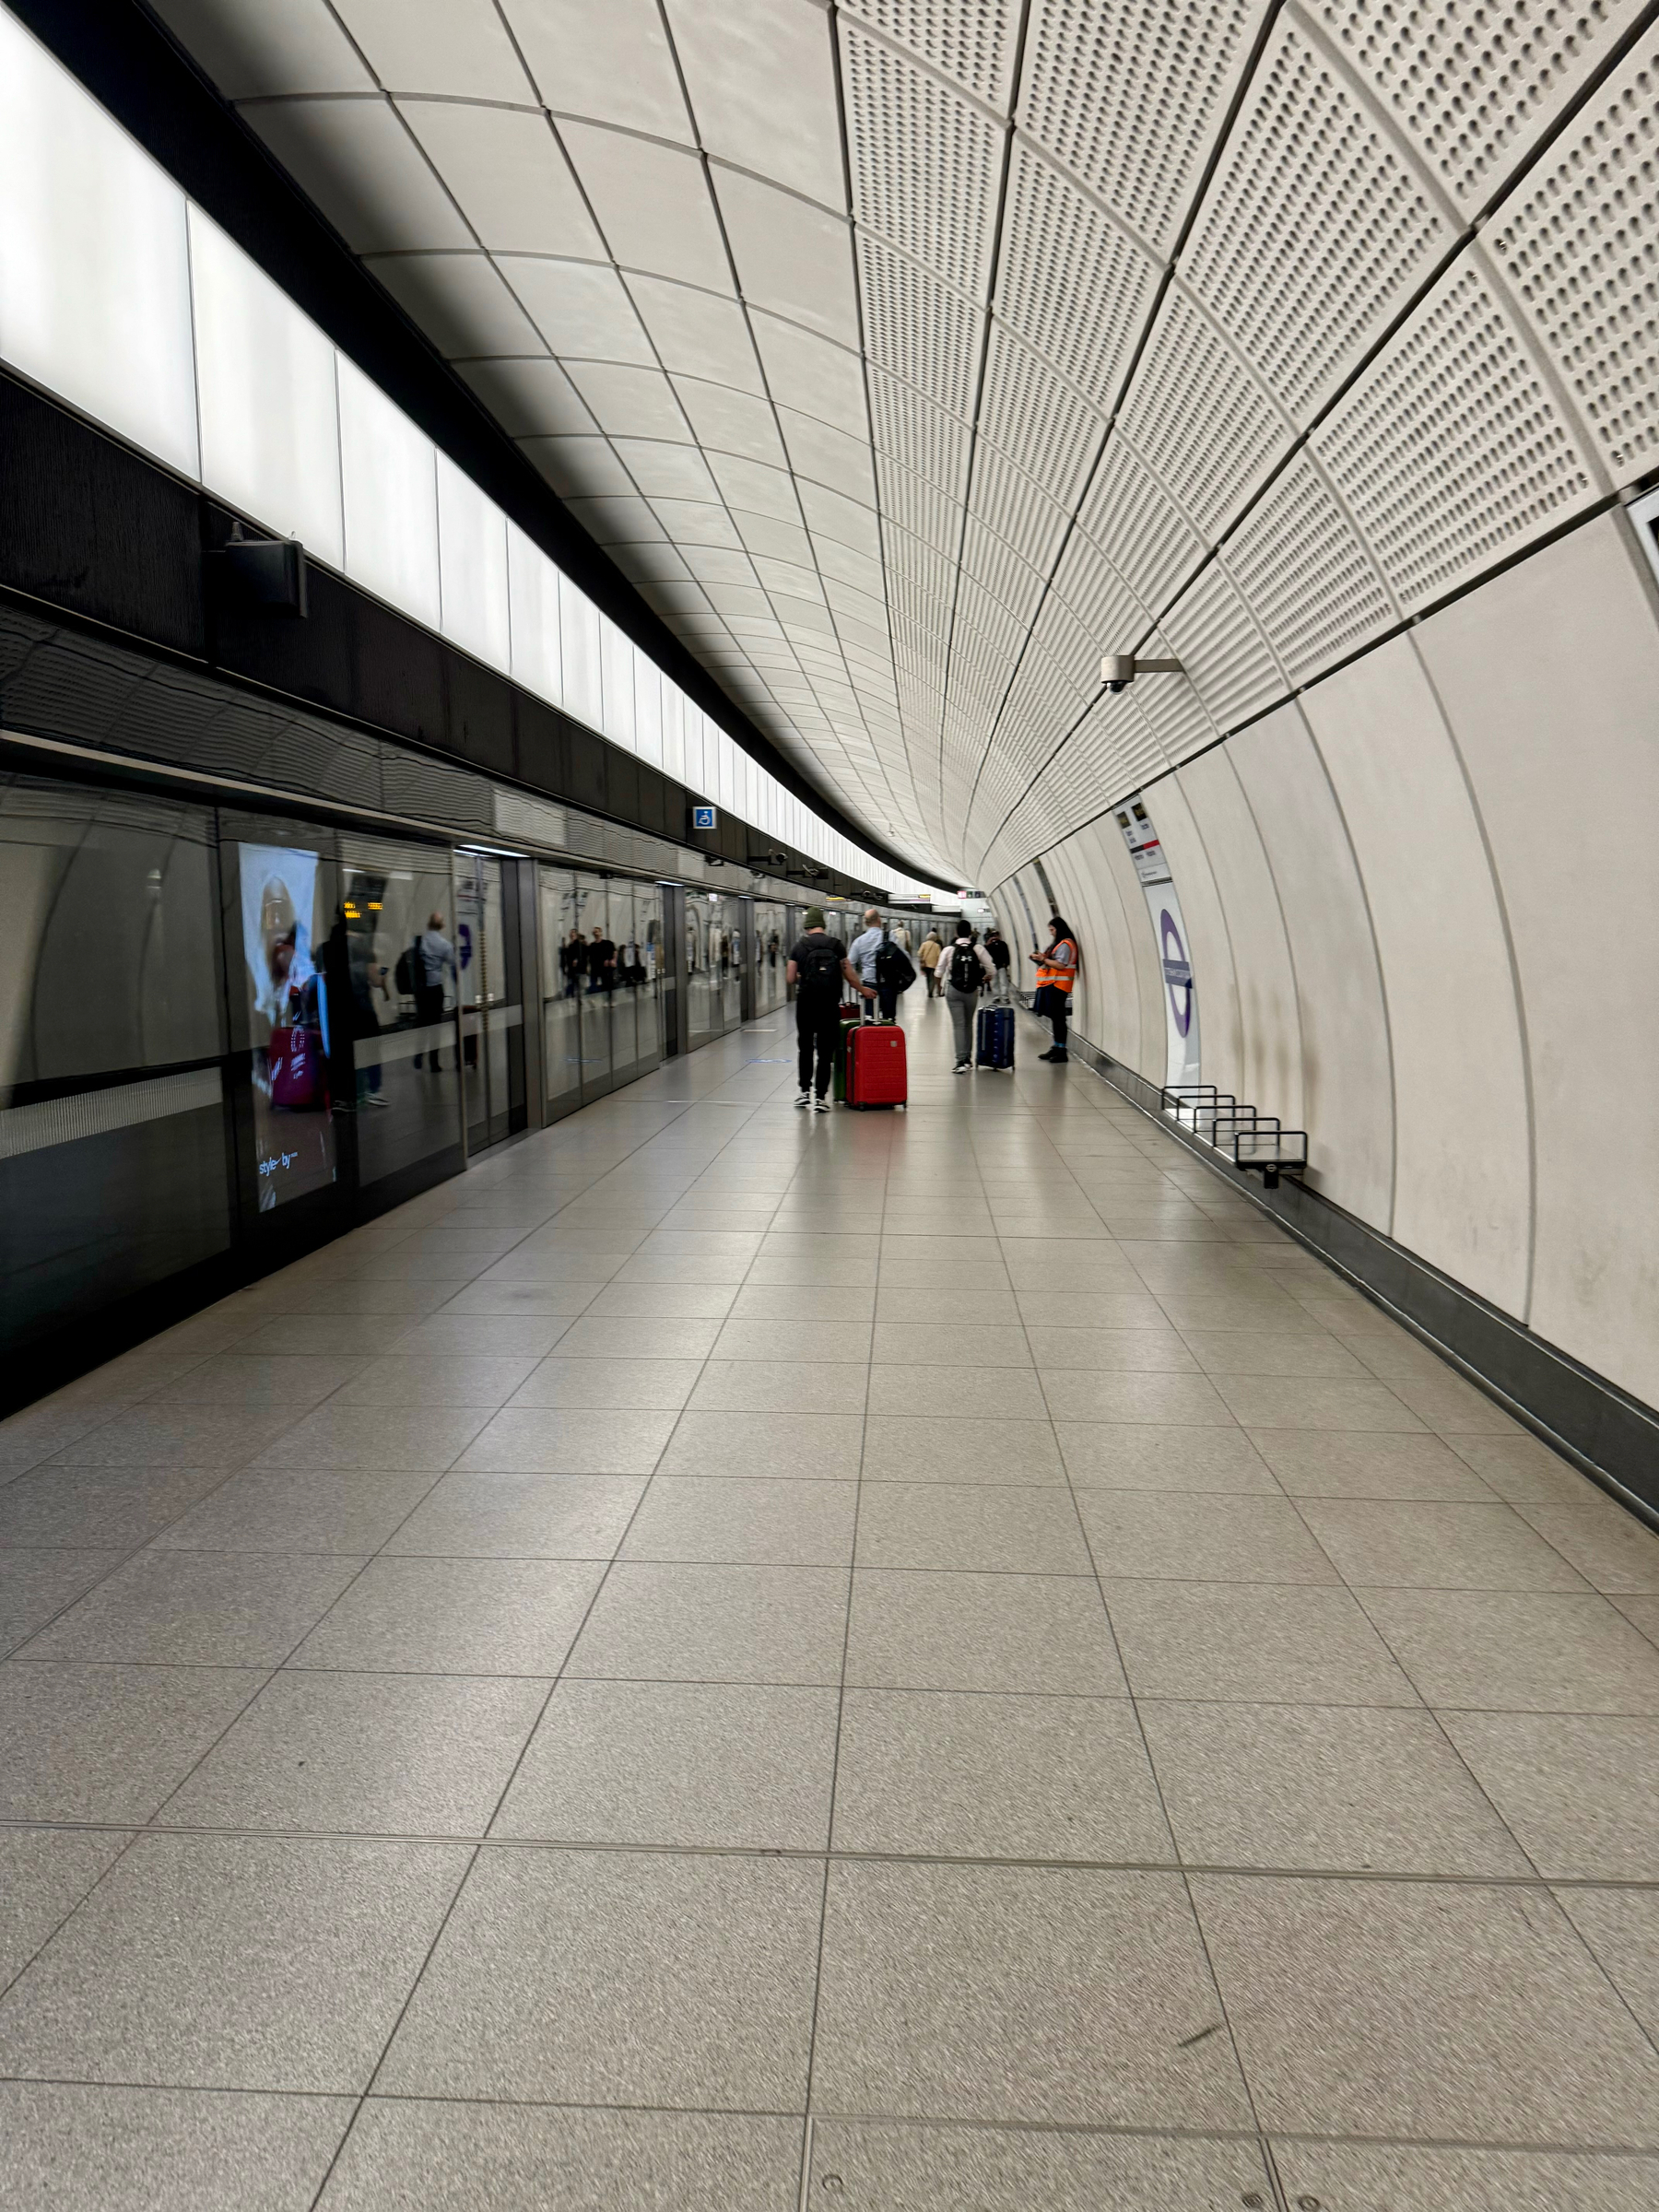 A subway station on the Elizabeth line from the airport. Interior of a modern subway station with curved walls and ceiling, featuring a reflective surface on one side and a tiled flooring leading to platform gates where people are standing and walking. One individual is noticeable in the foreground pulling a red suitcase.